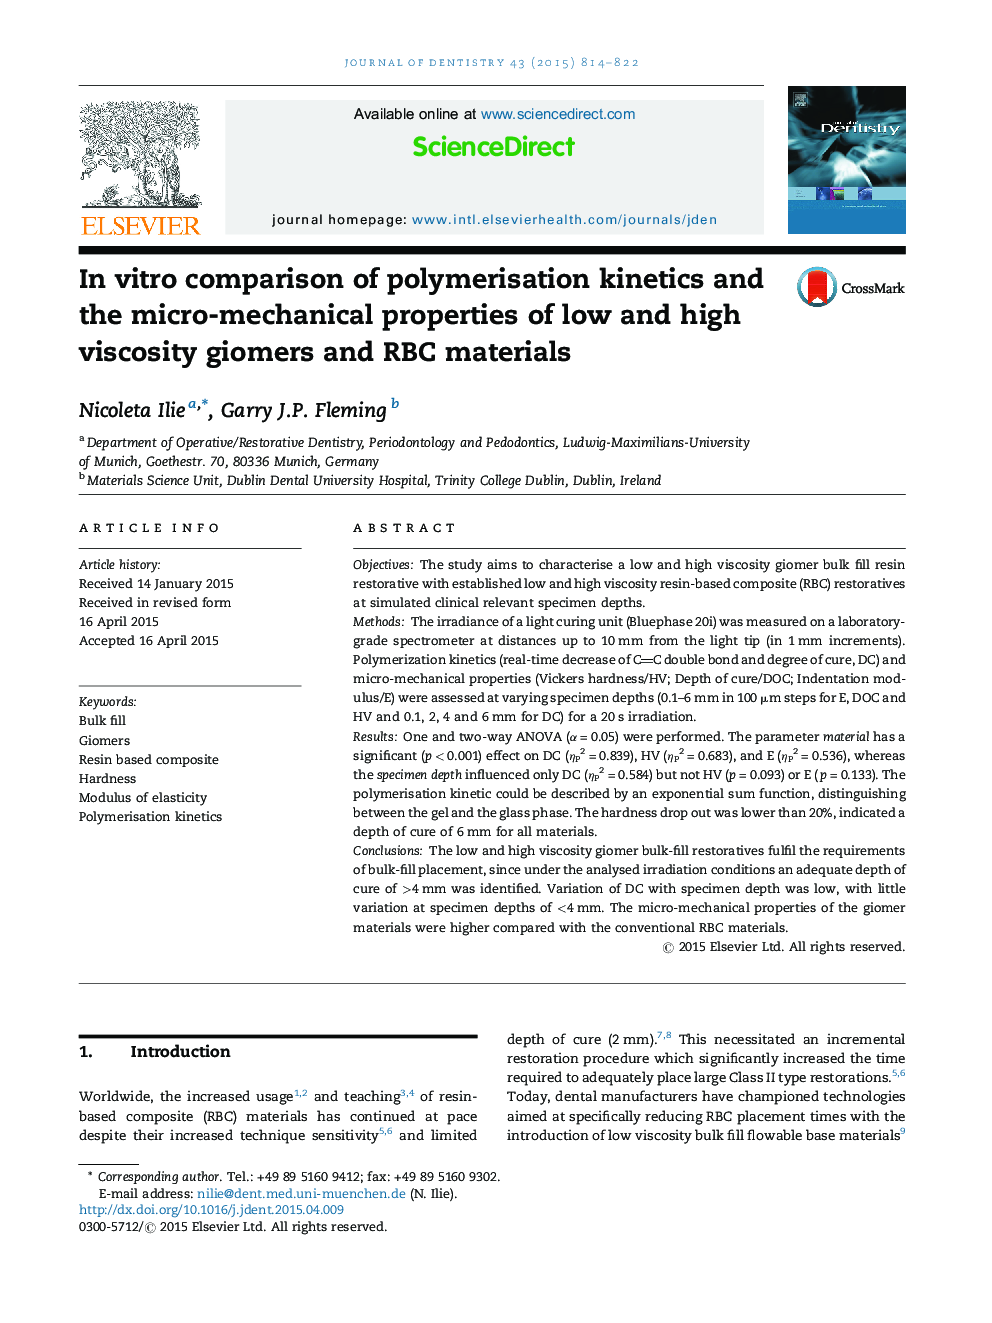 In vitro comparison of polymerisation kinetics and the micro-mechanical properties of low and high viscosity giomers and RBC materials